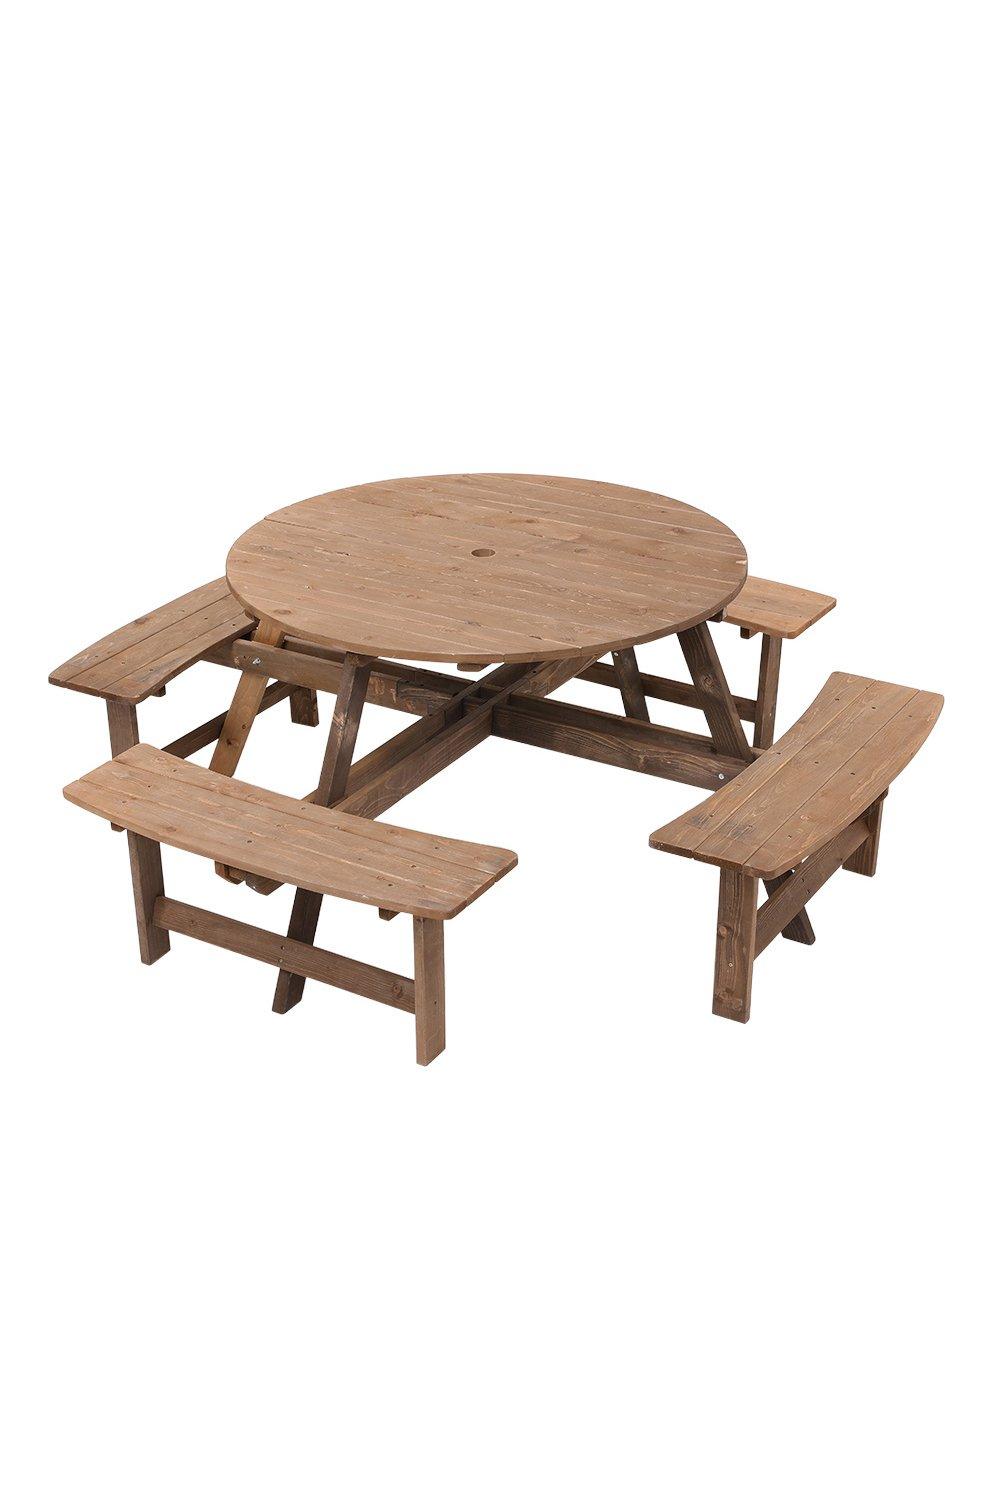 8-Person Round Wood Picnic Table and Bench Set